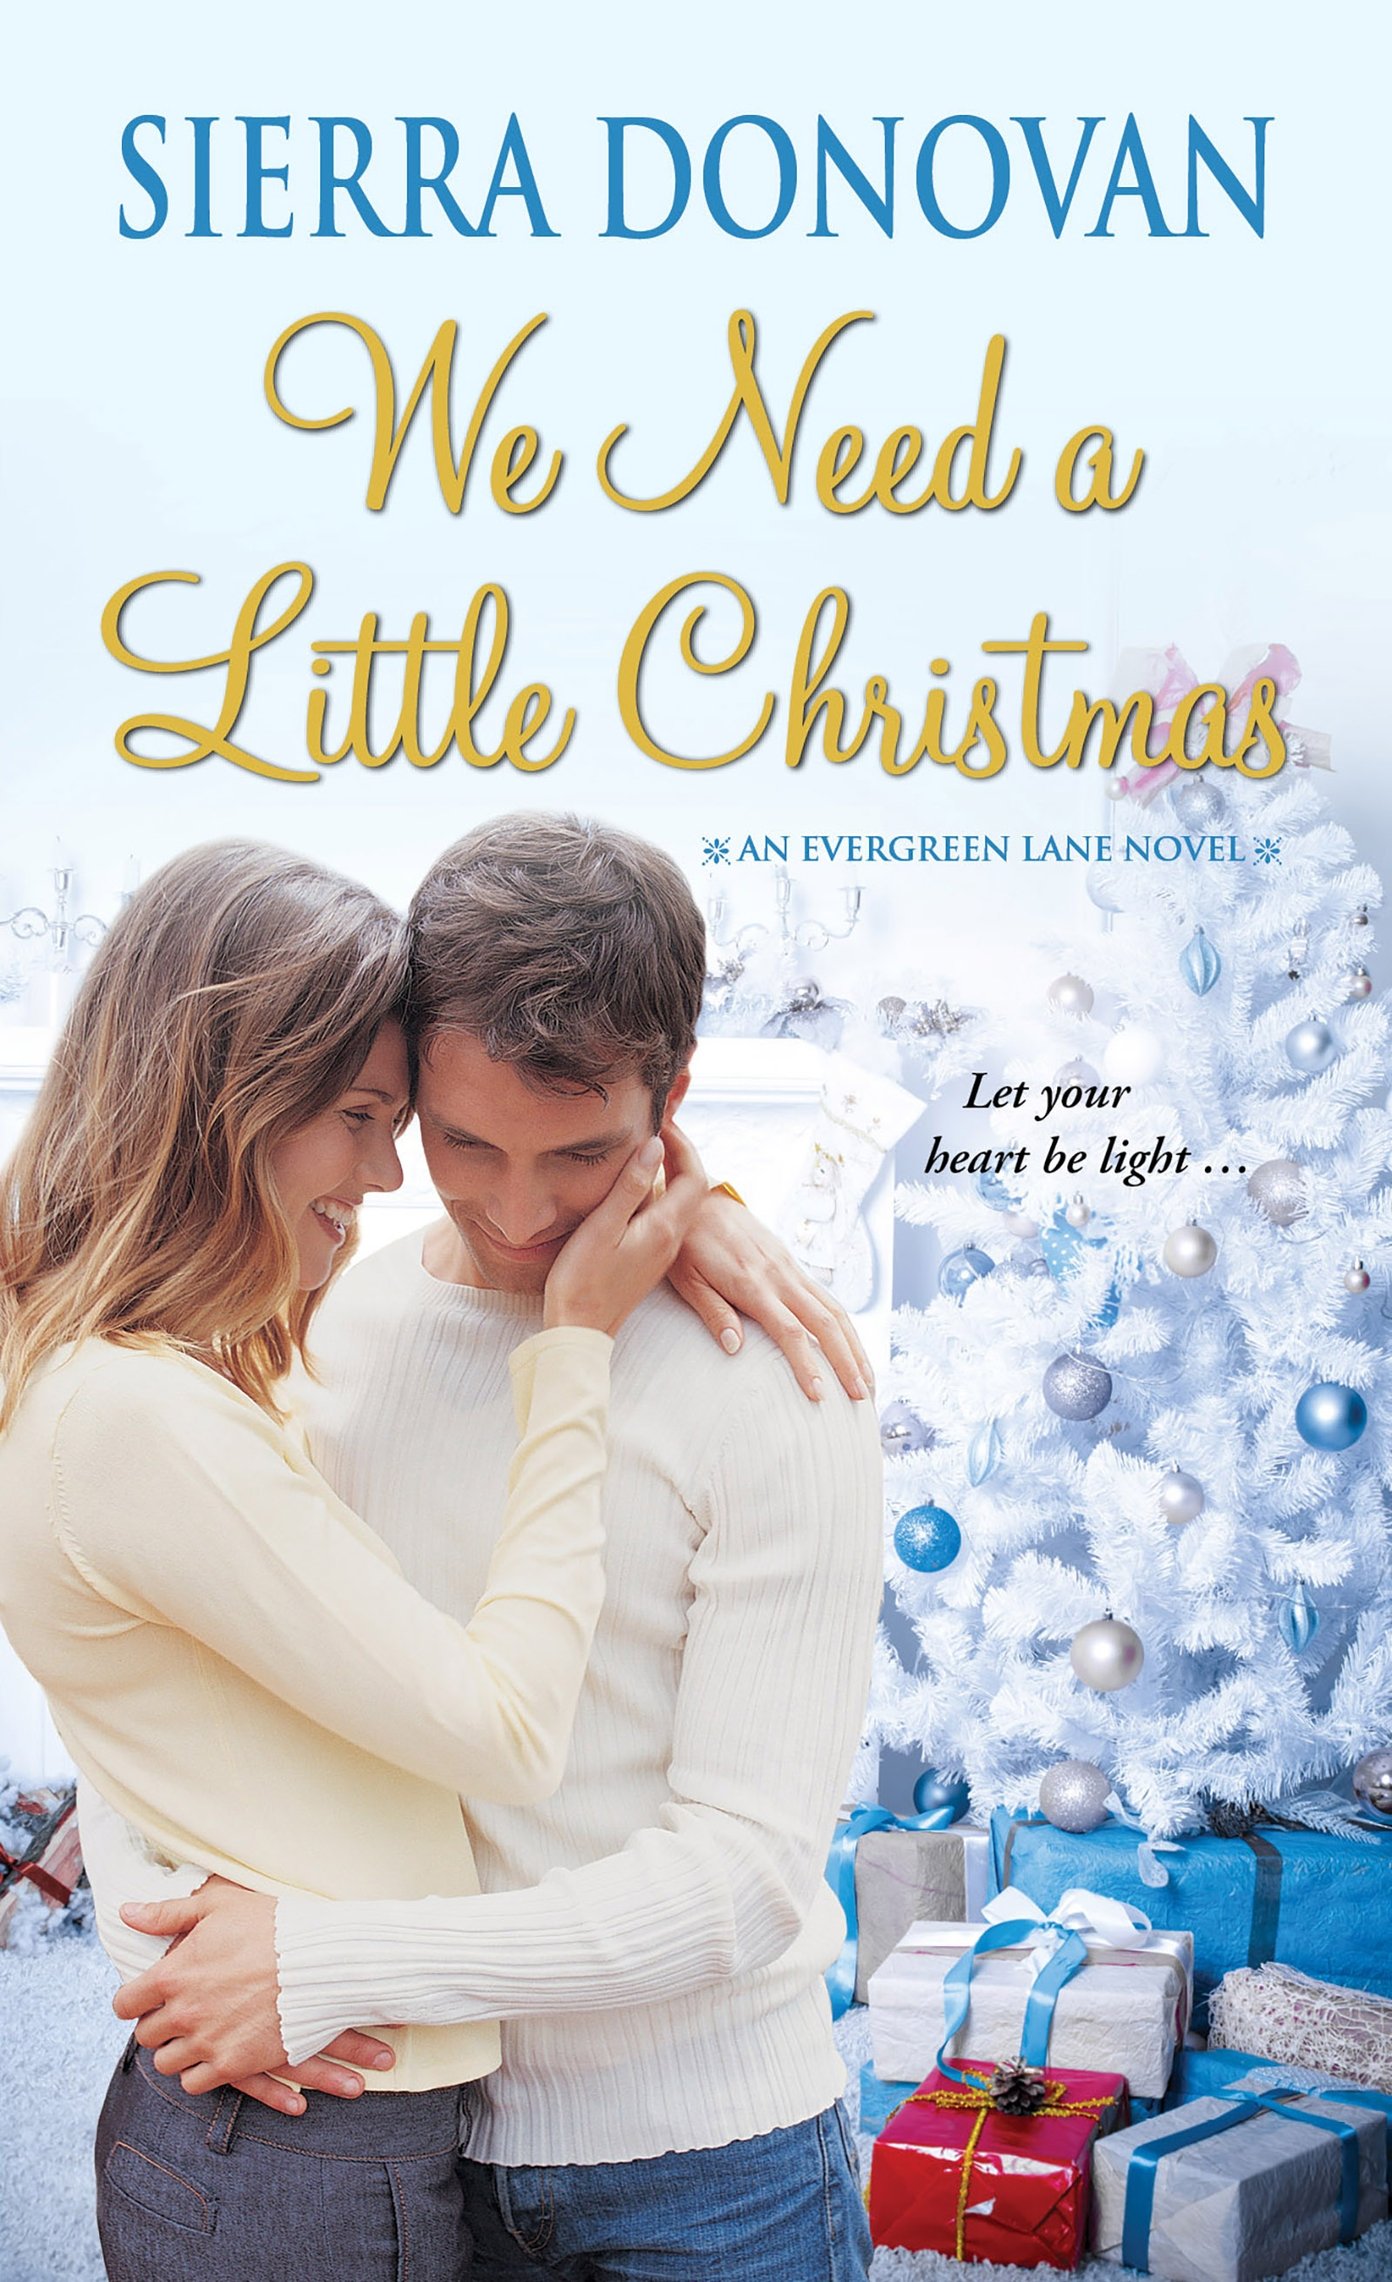 We Need a Little Christmas (2016) by Sierra Donovan